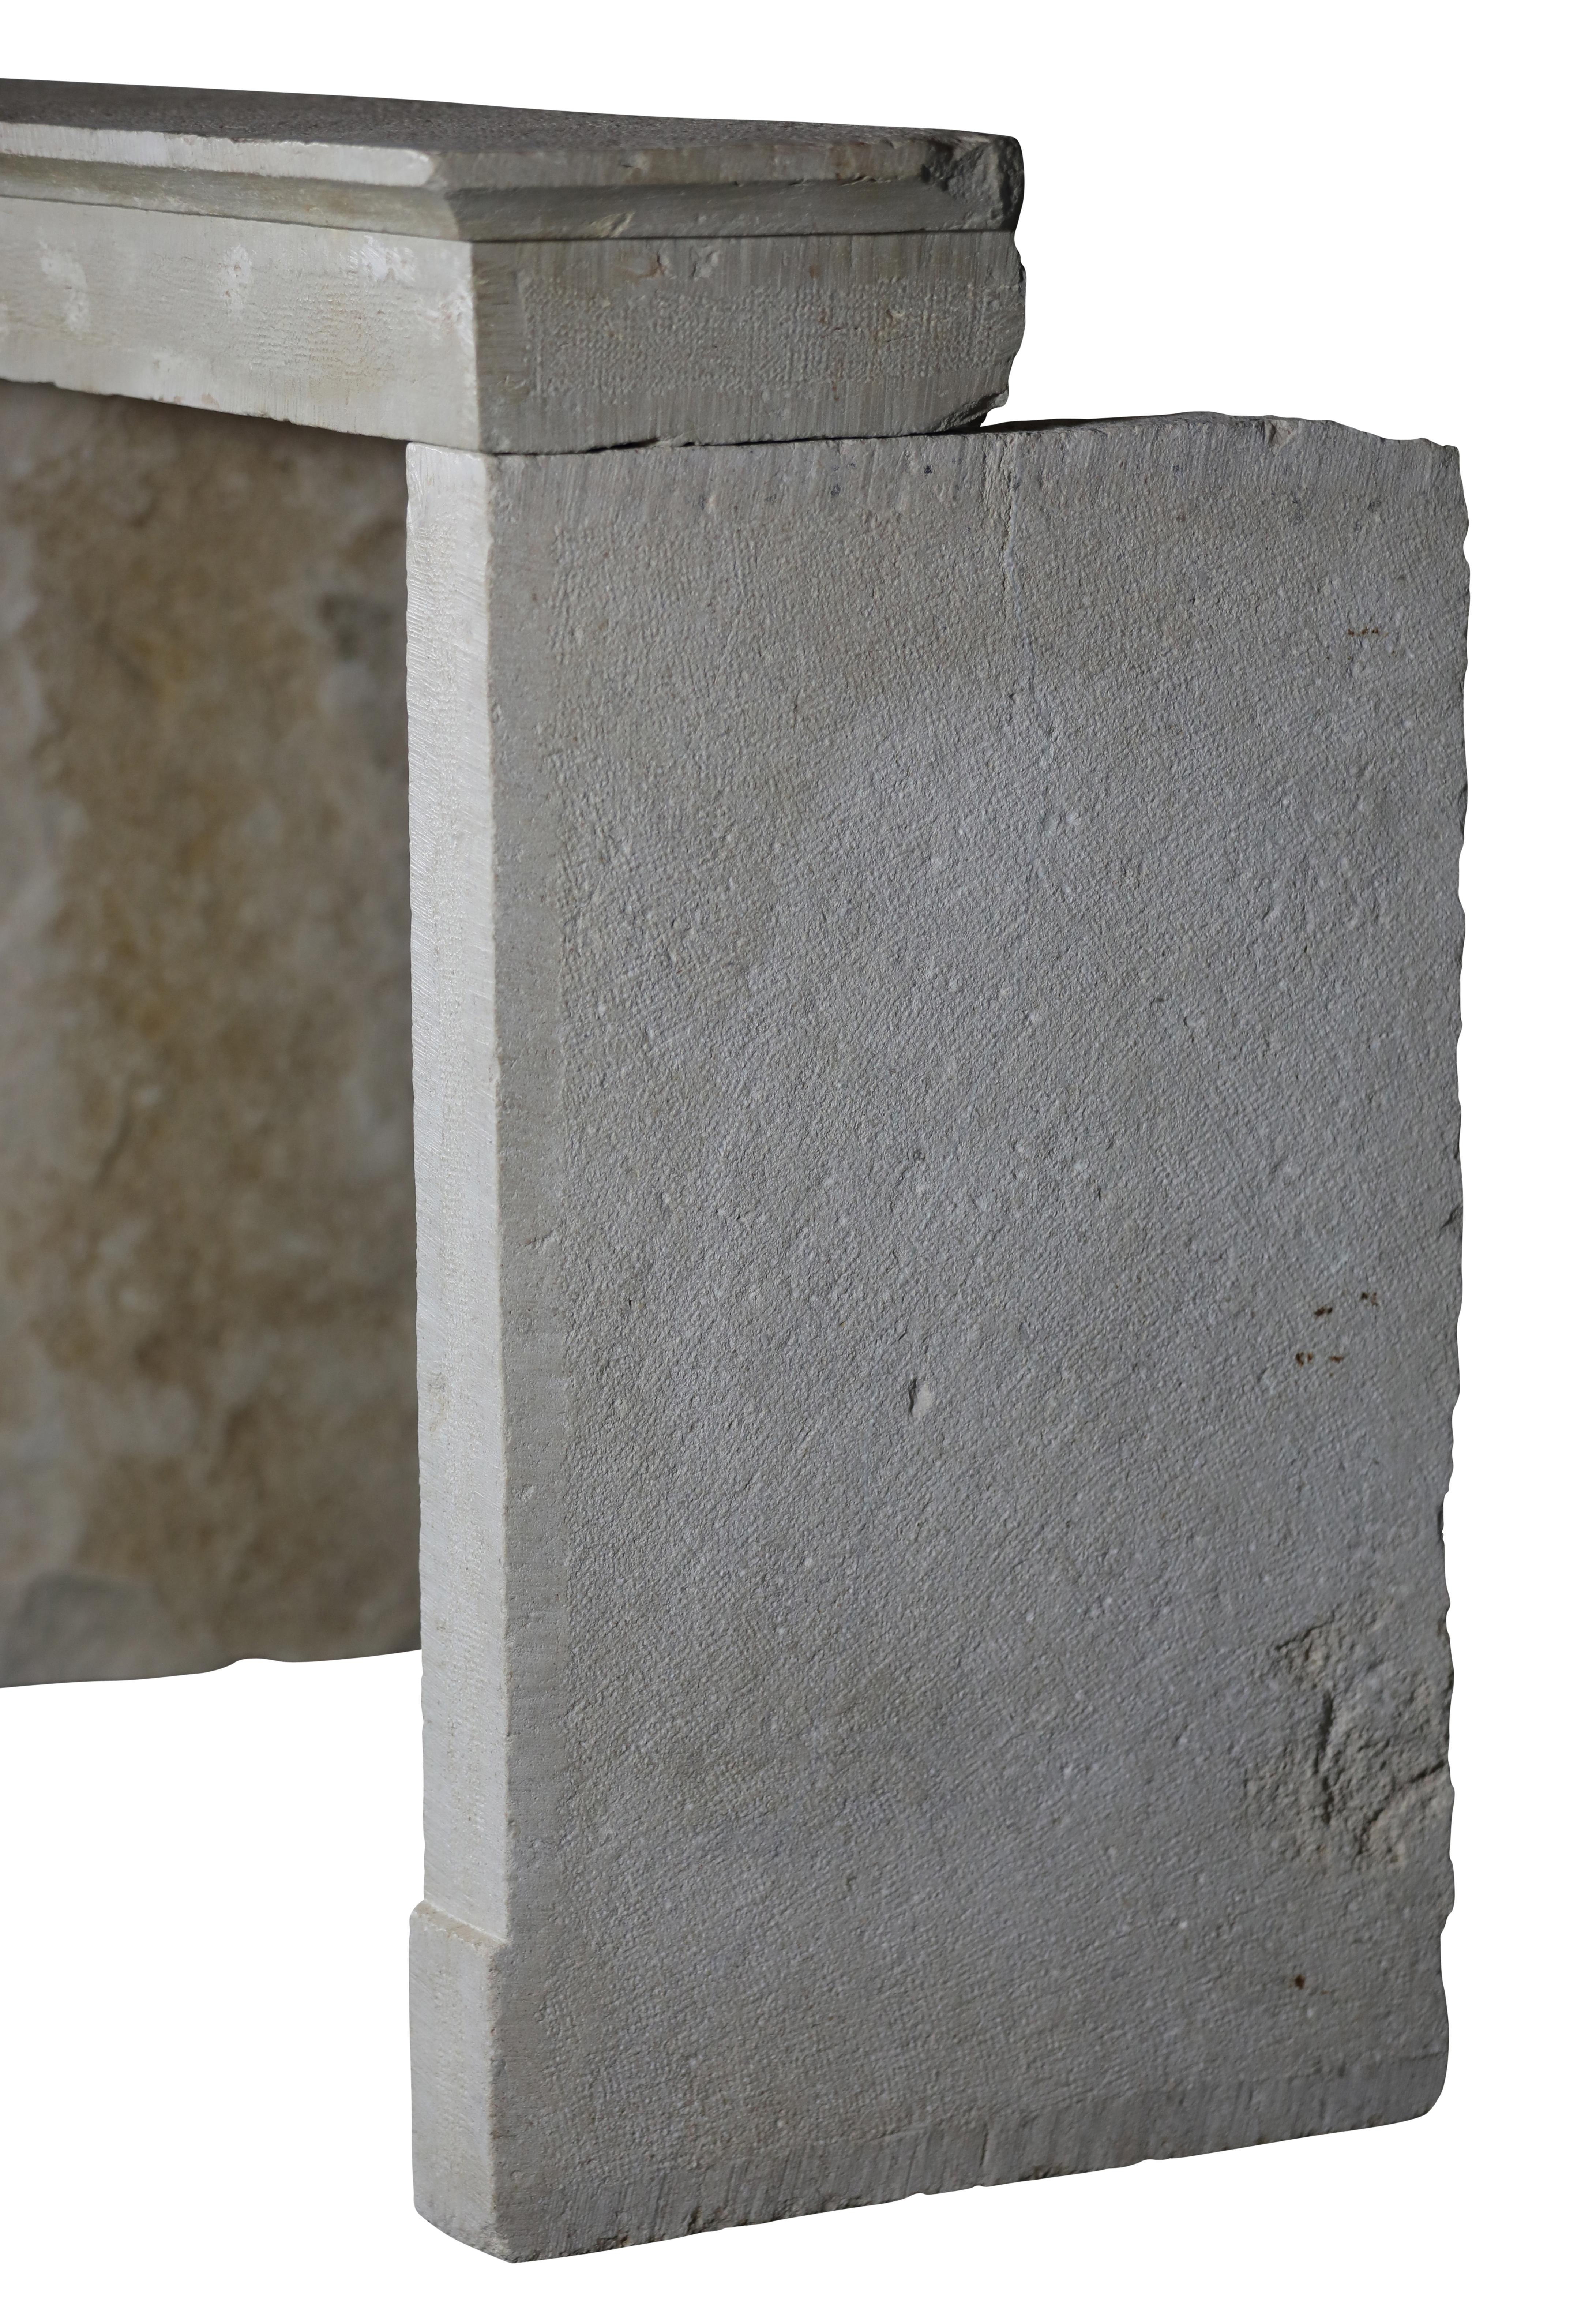 Timeless French Beige Reclaimed Limestone Fireplace Surround For Sale 2